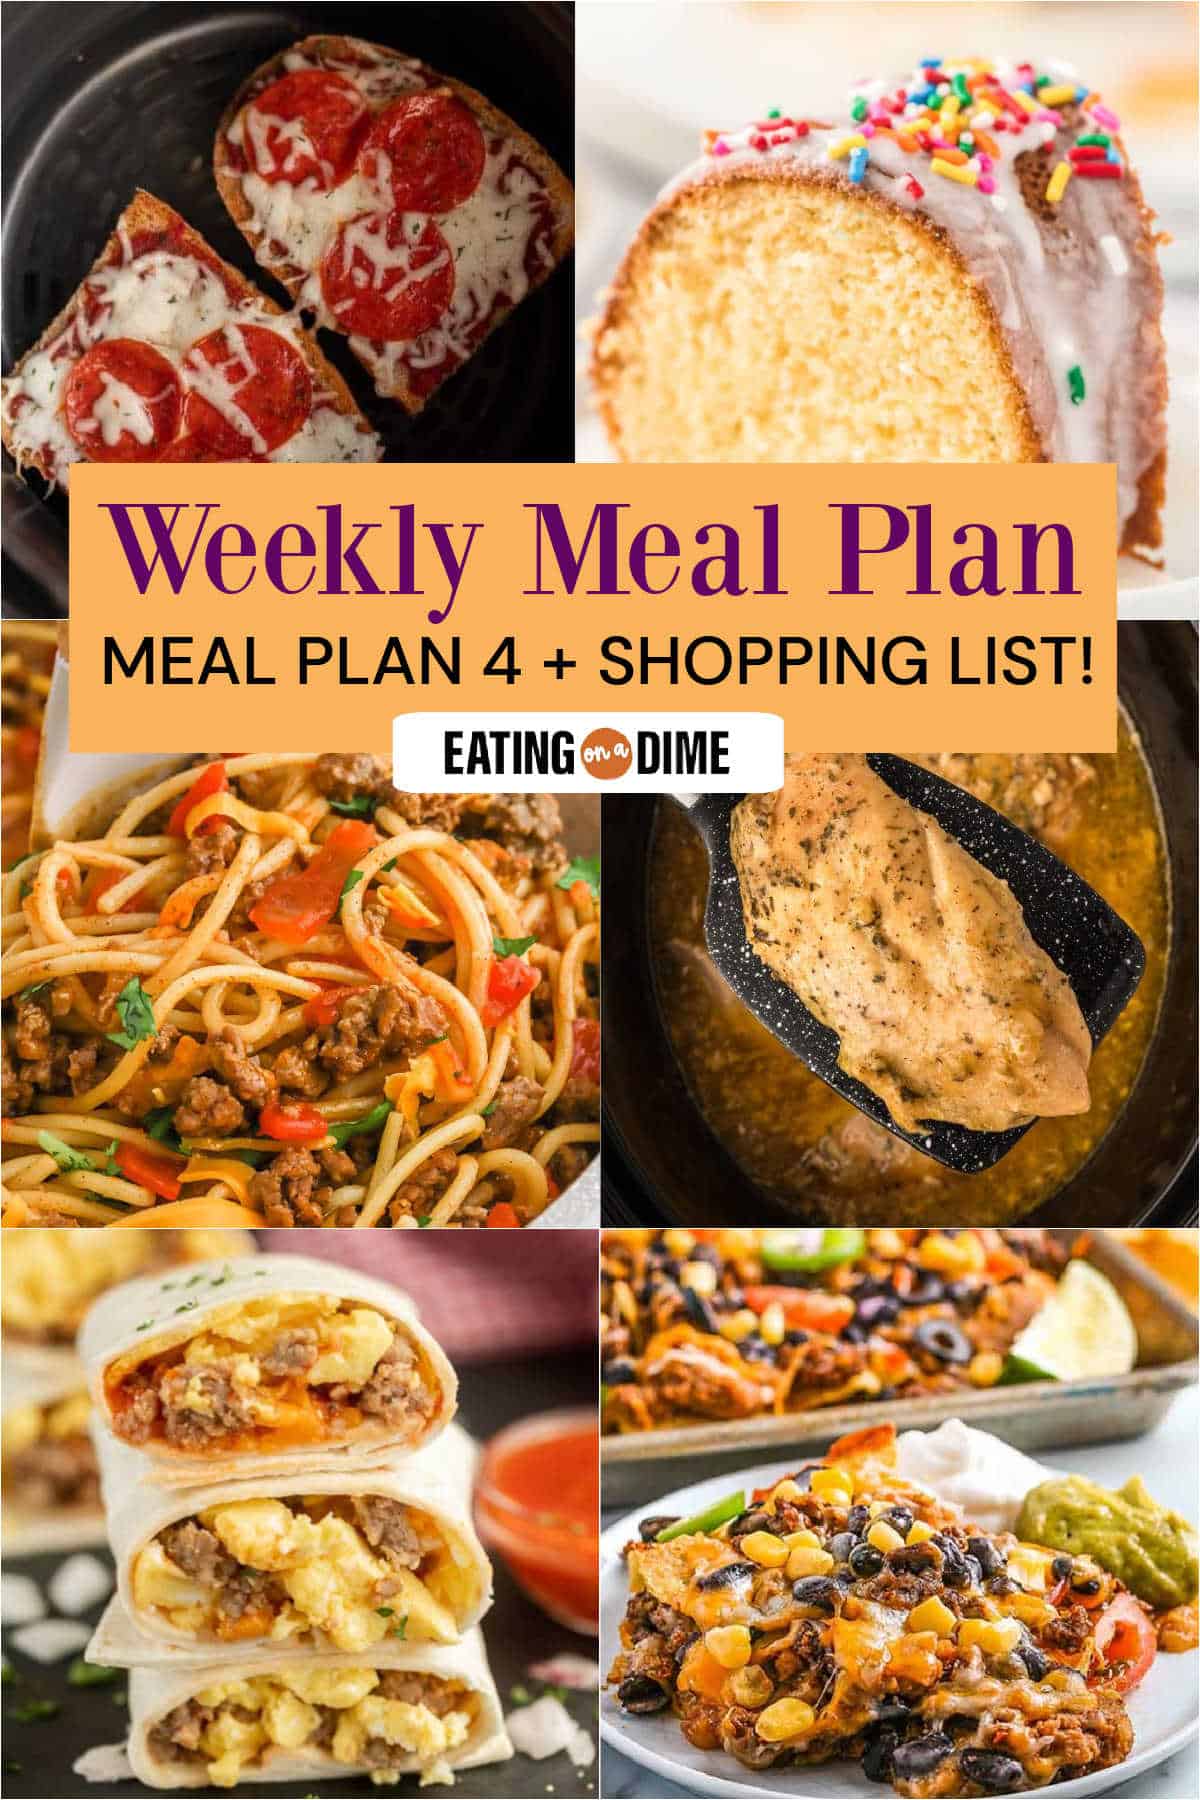 Picture of the meals from this week's meal plan: Air Fryer French Bread Pizza, Melted Ice Cream Cake, Taco Spaghetti, Crock Pot Ranch Chicken, Breakfast Burritos, Oven Baked Nachos. 
